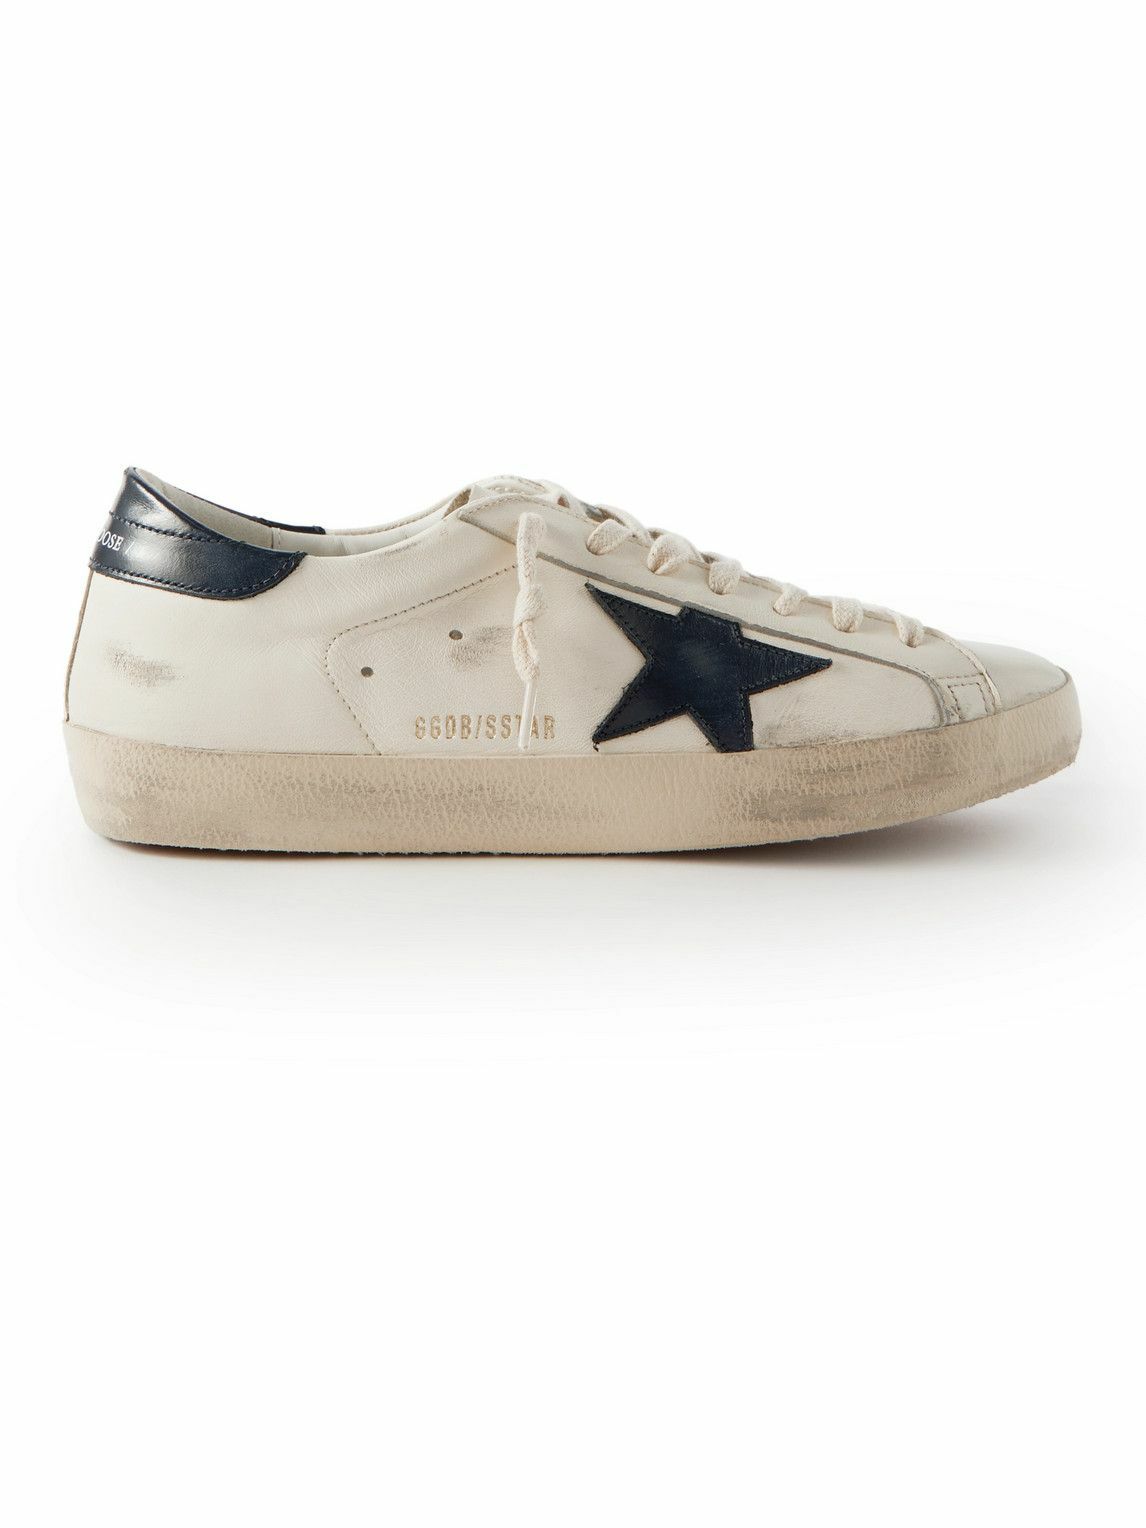 Golden Goose - Superstar Distressed Leather Sneakers - White Golden ...